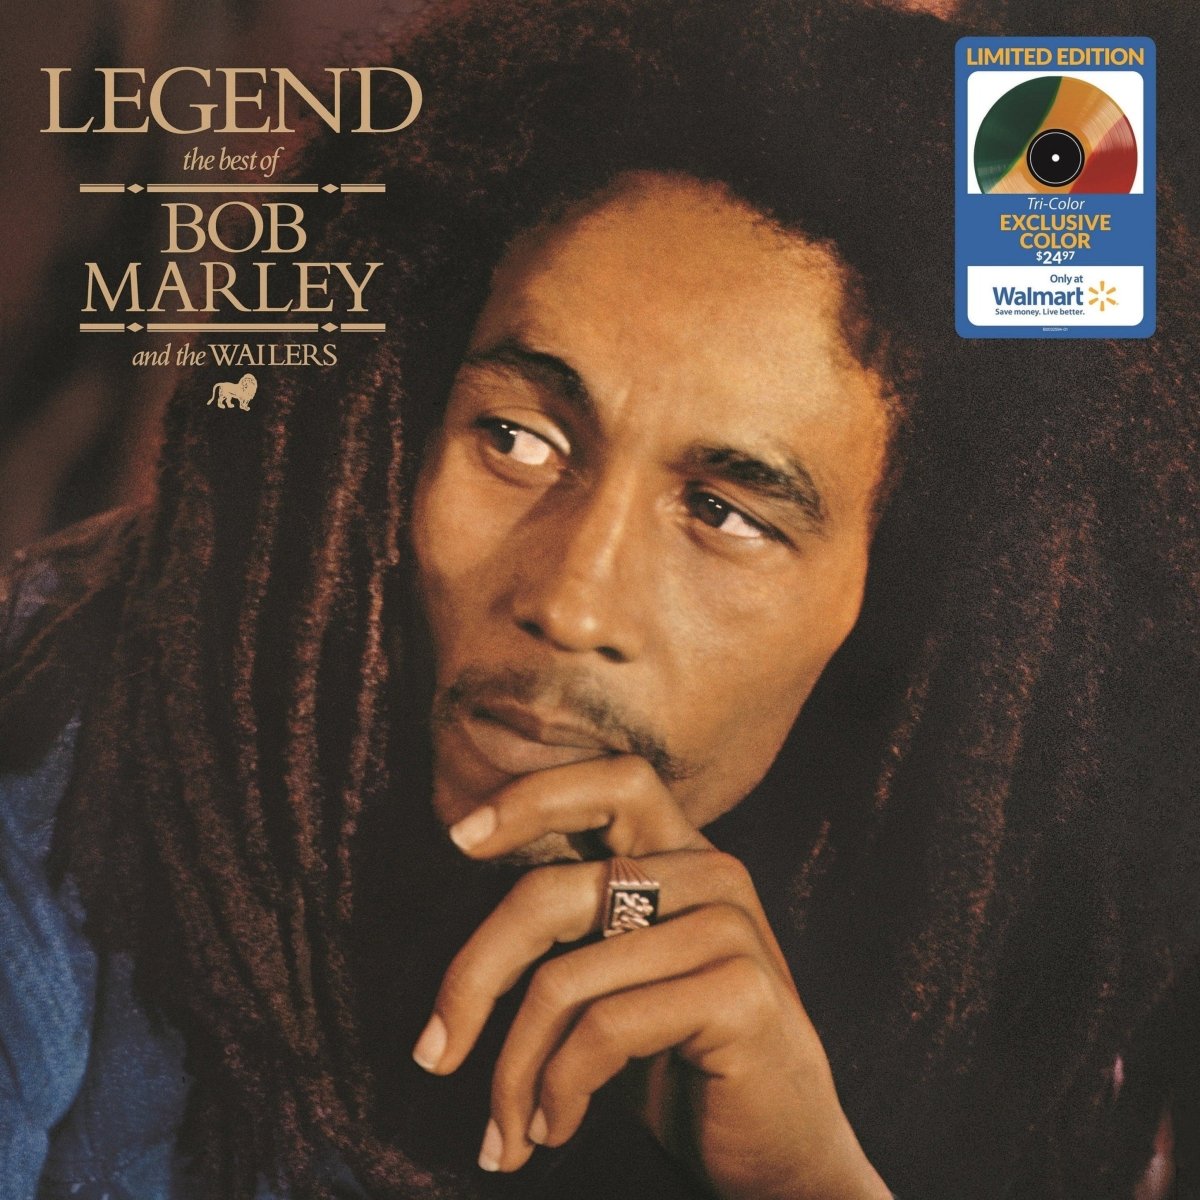 Bob Marley & The Wailers - Legend (The Best Of Bob Marley And The Wailers) Vinyl